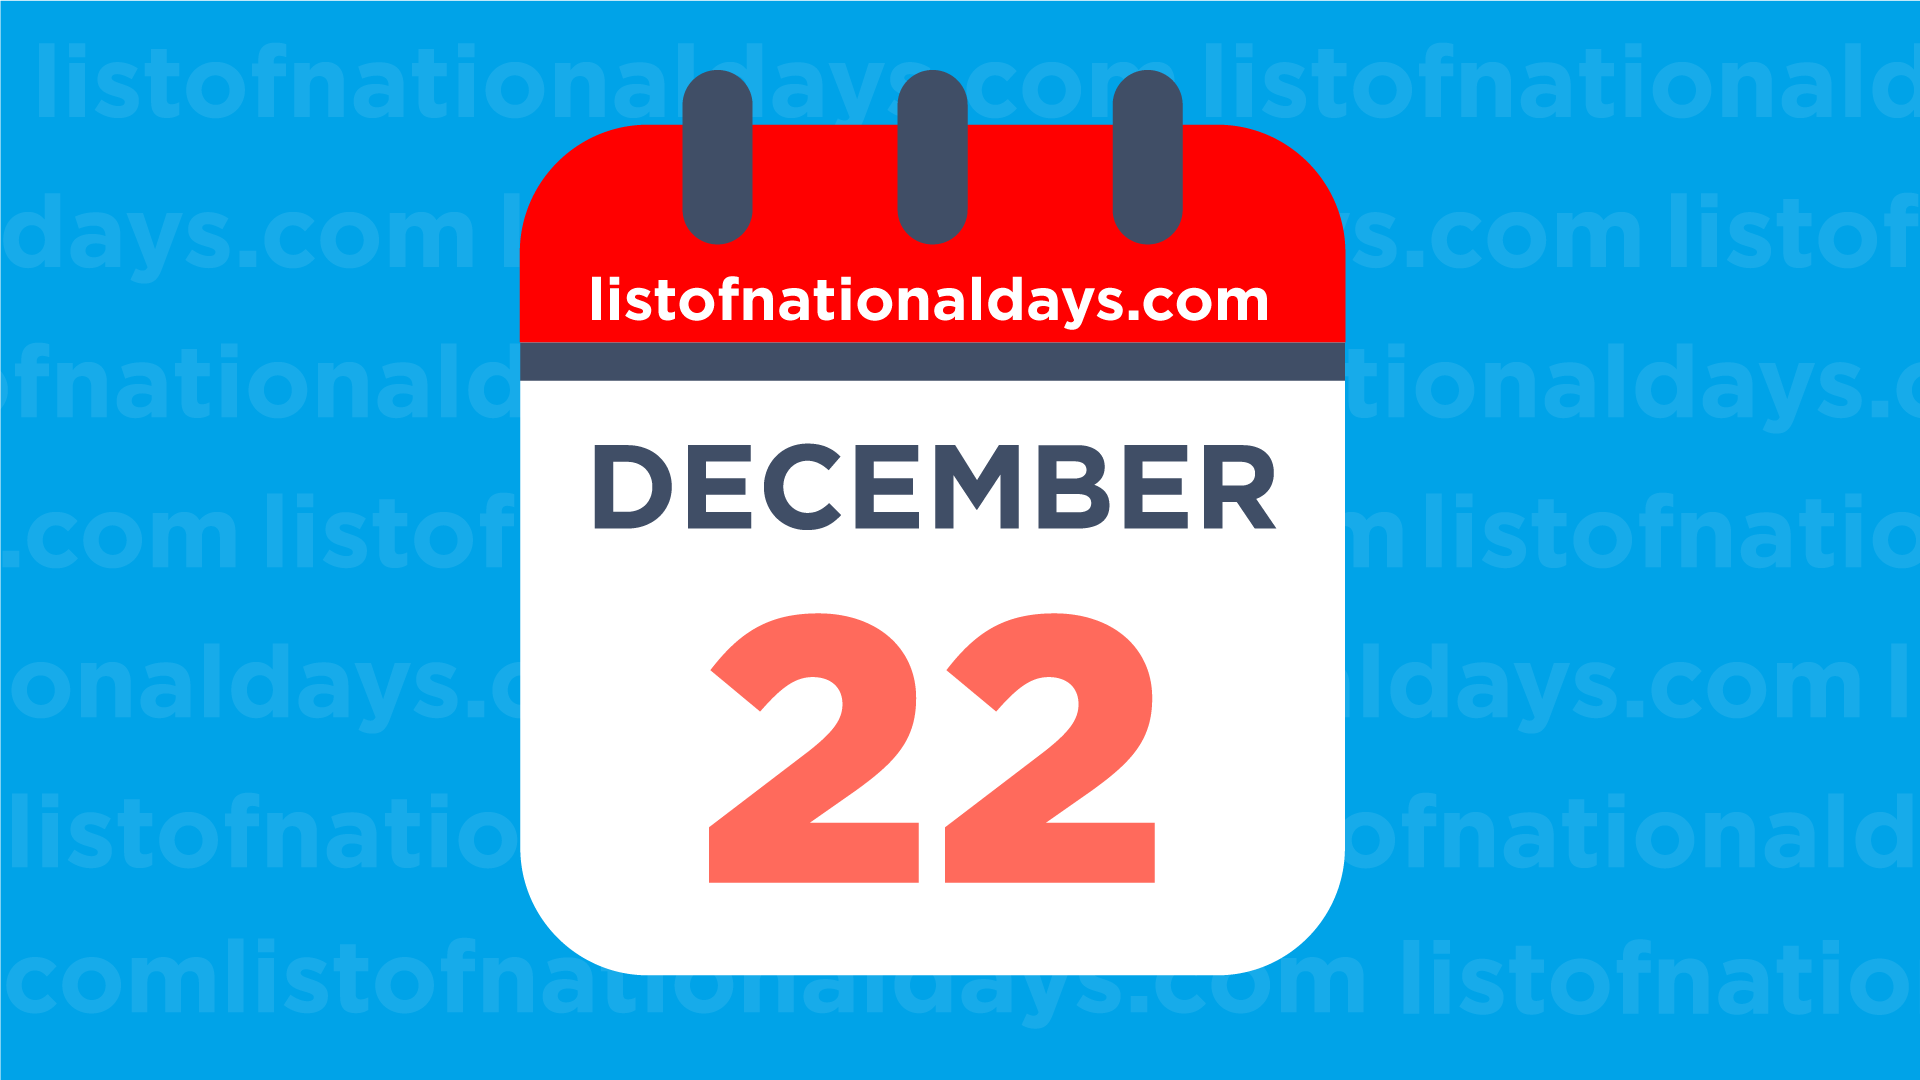 DECEMBER 22ND: National Holidays,Observances & Famous Birthdays1920 x 1080